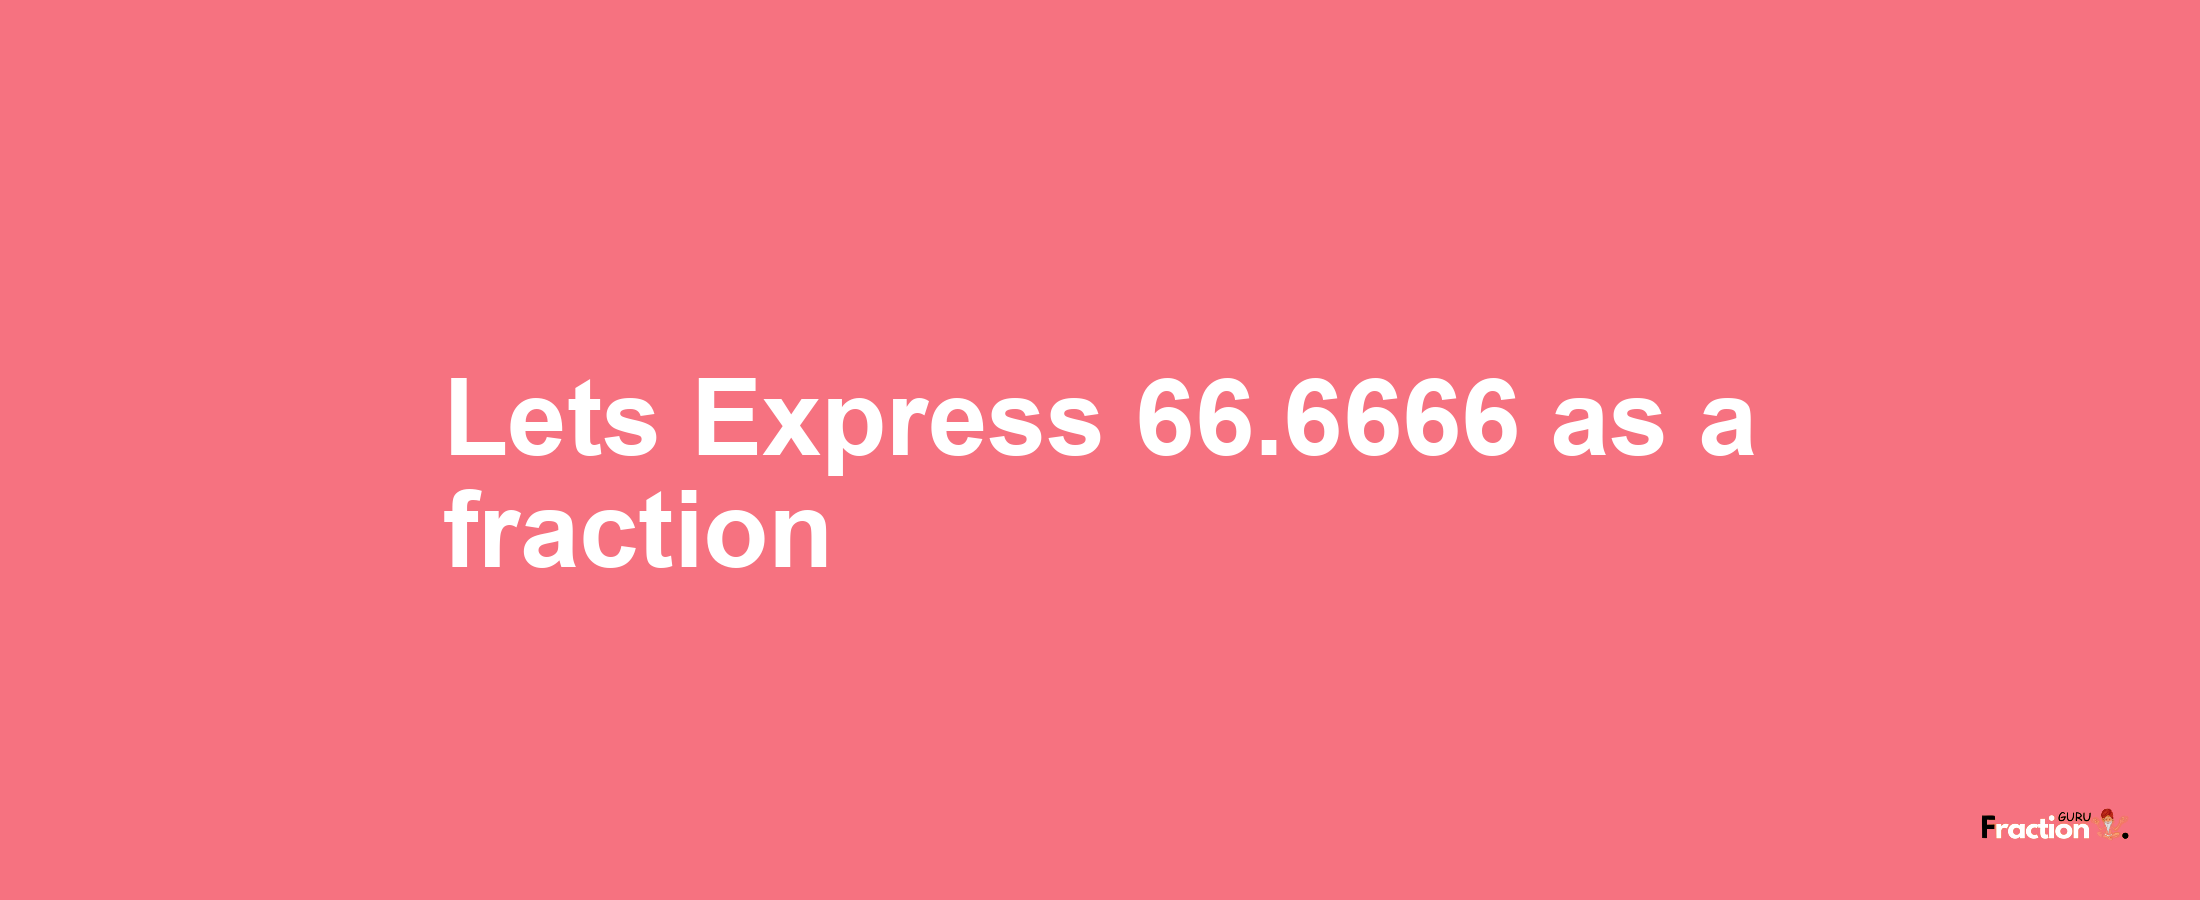 Lets Express 66.6666 as afraction